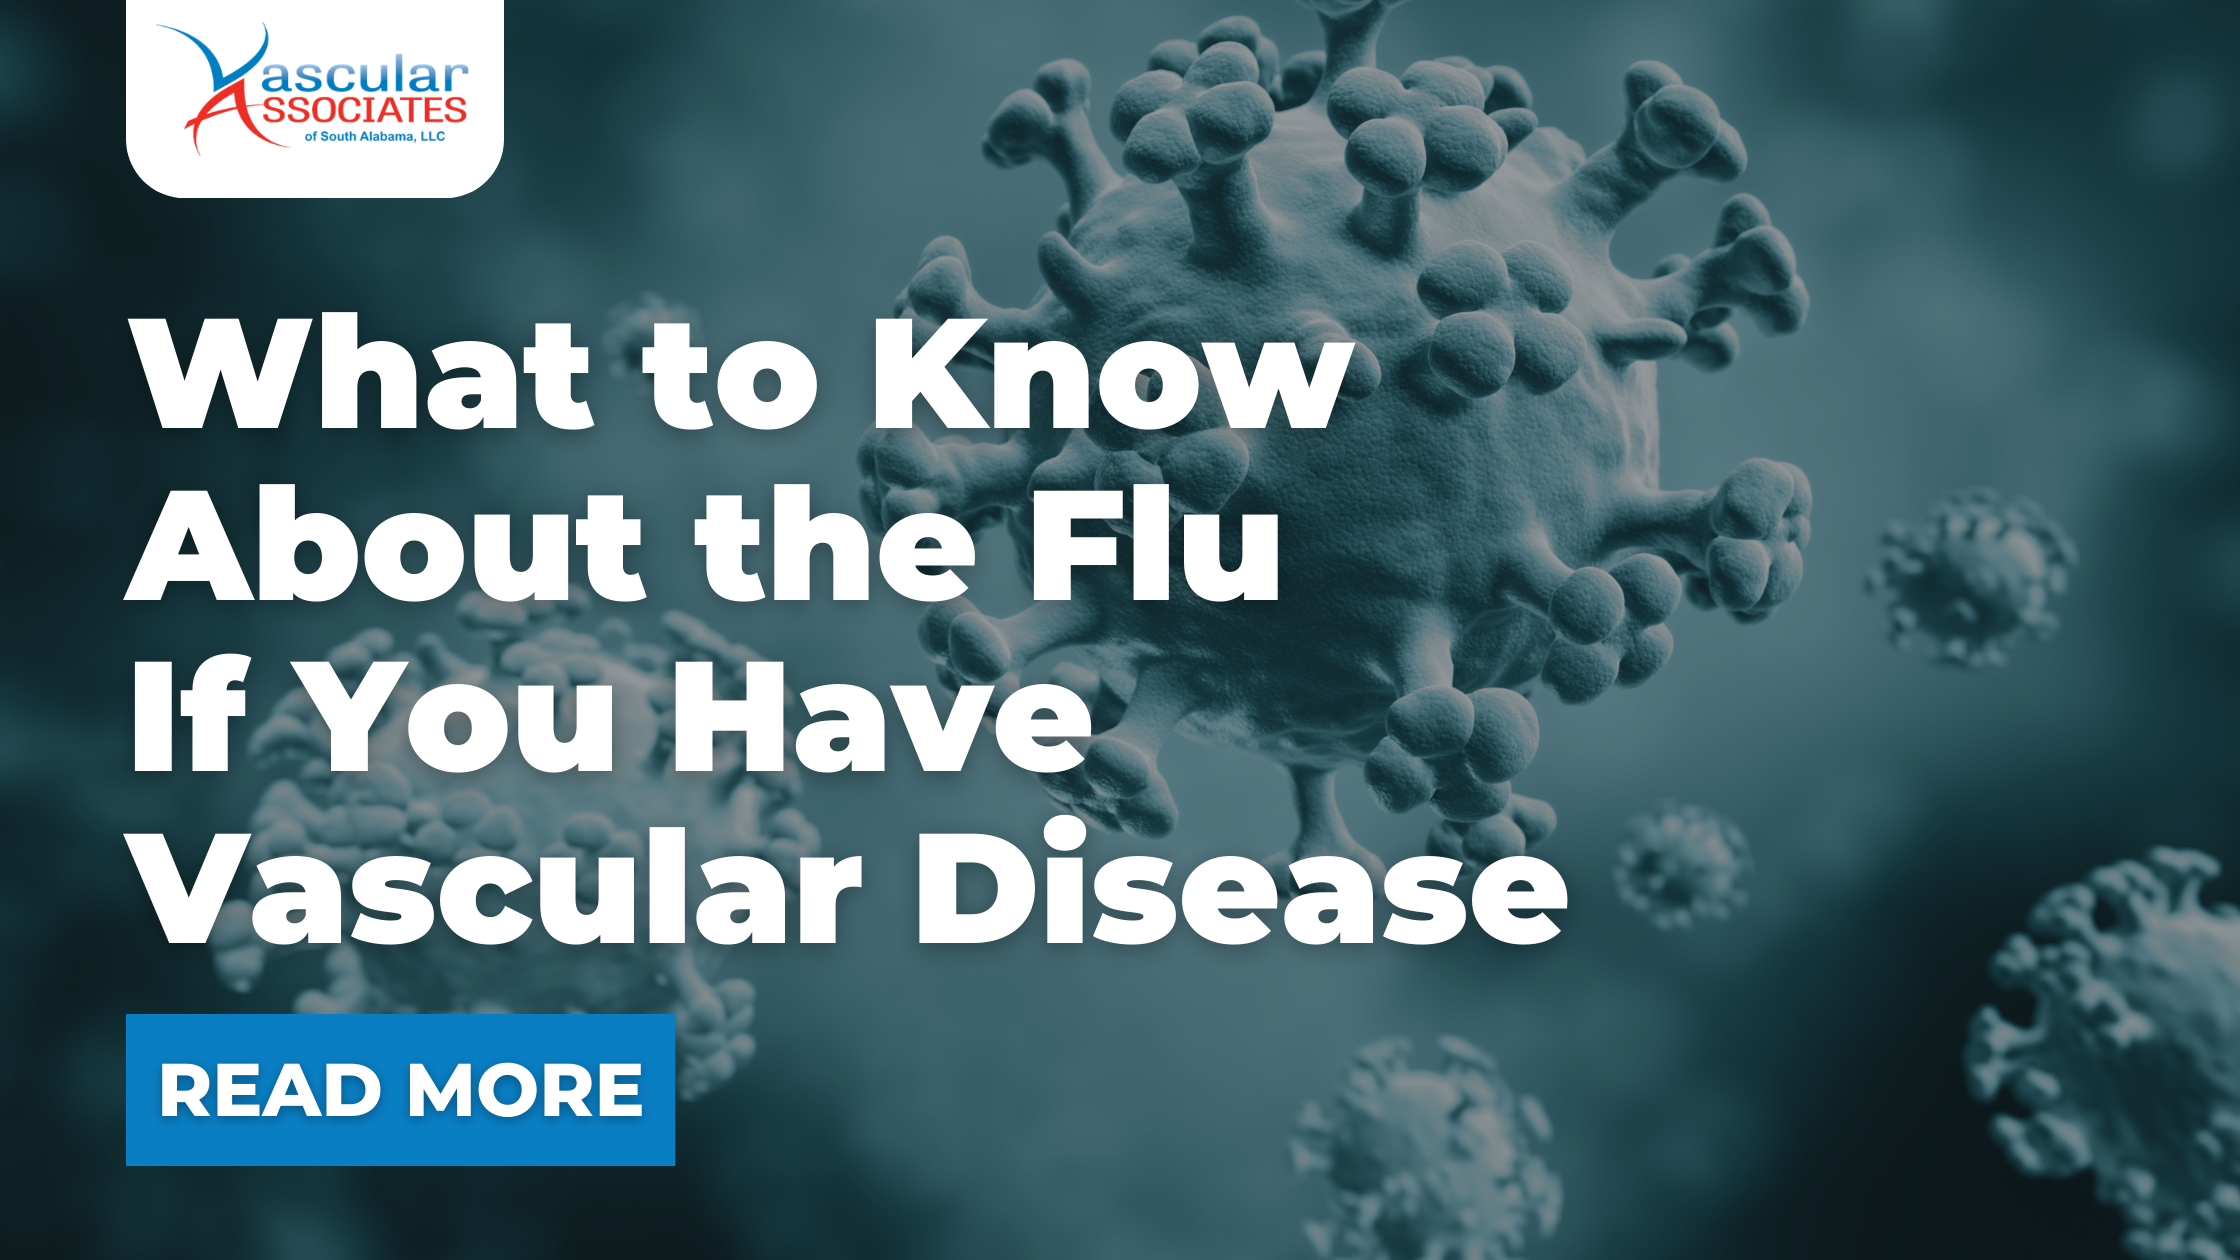 Vascular Blog - What to Know About the Flu If You Have Vascular Disease.png